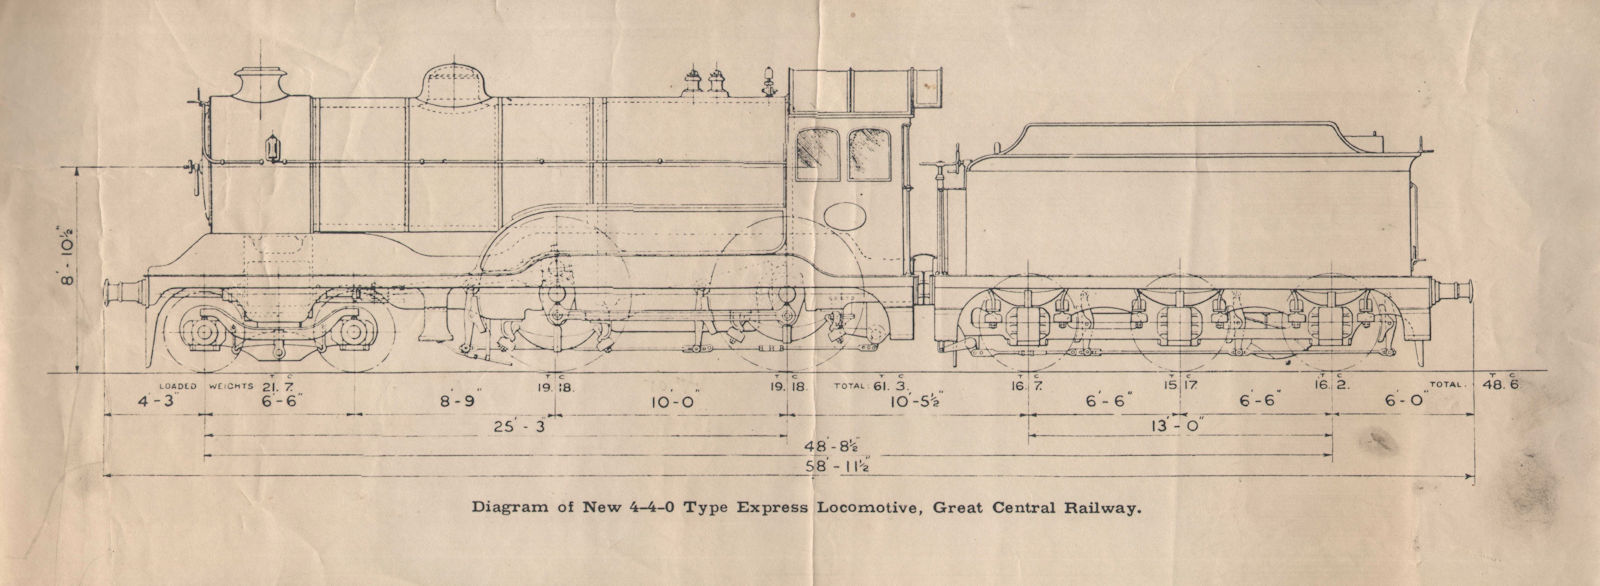 Diagram of New 4-4-0 Type Express Locomotive, Great Central Railway c1917